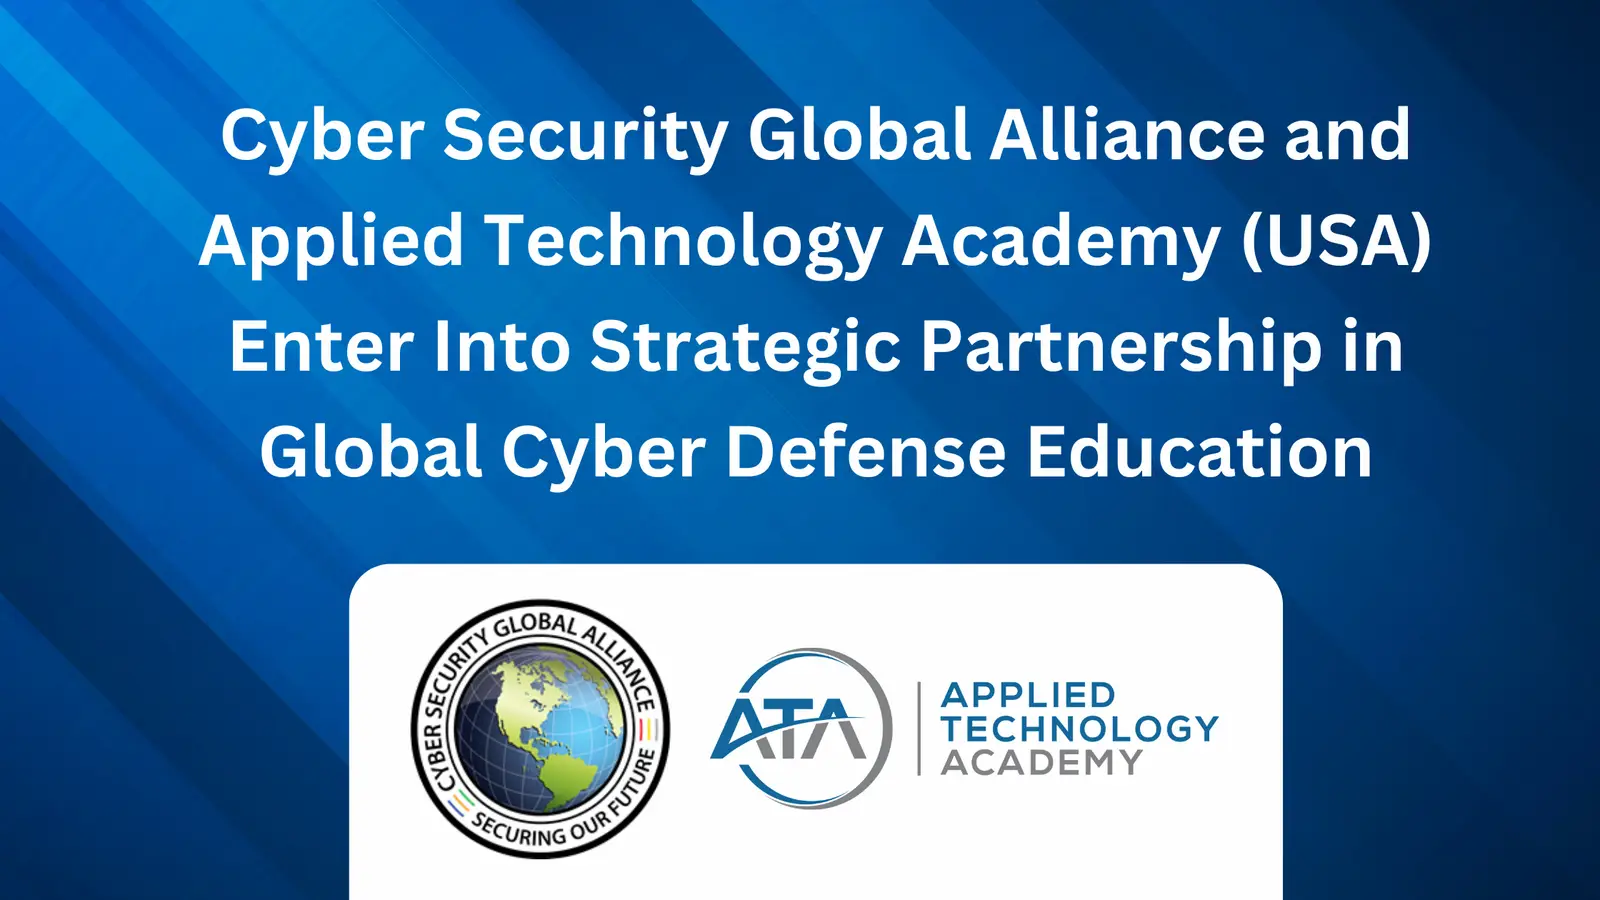 Cyber Security Global Alliance and Applied Technology Academy (USA) Enter Into Strategic Partnership in Global Cyber Defense Education